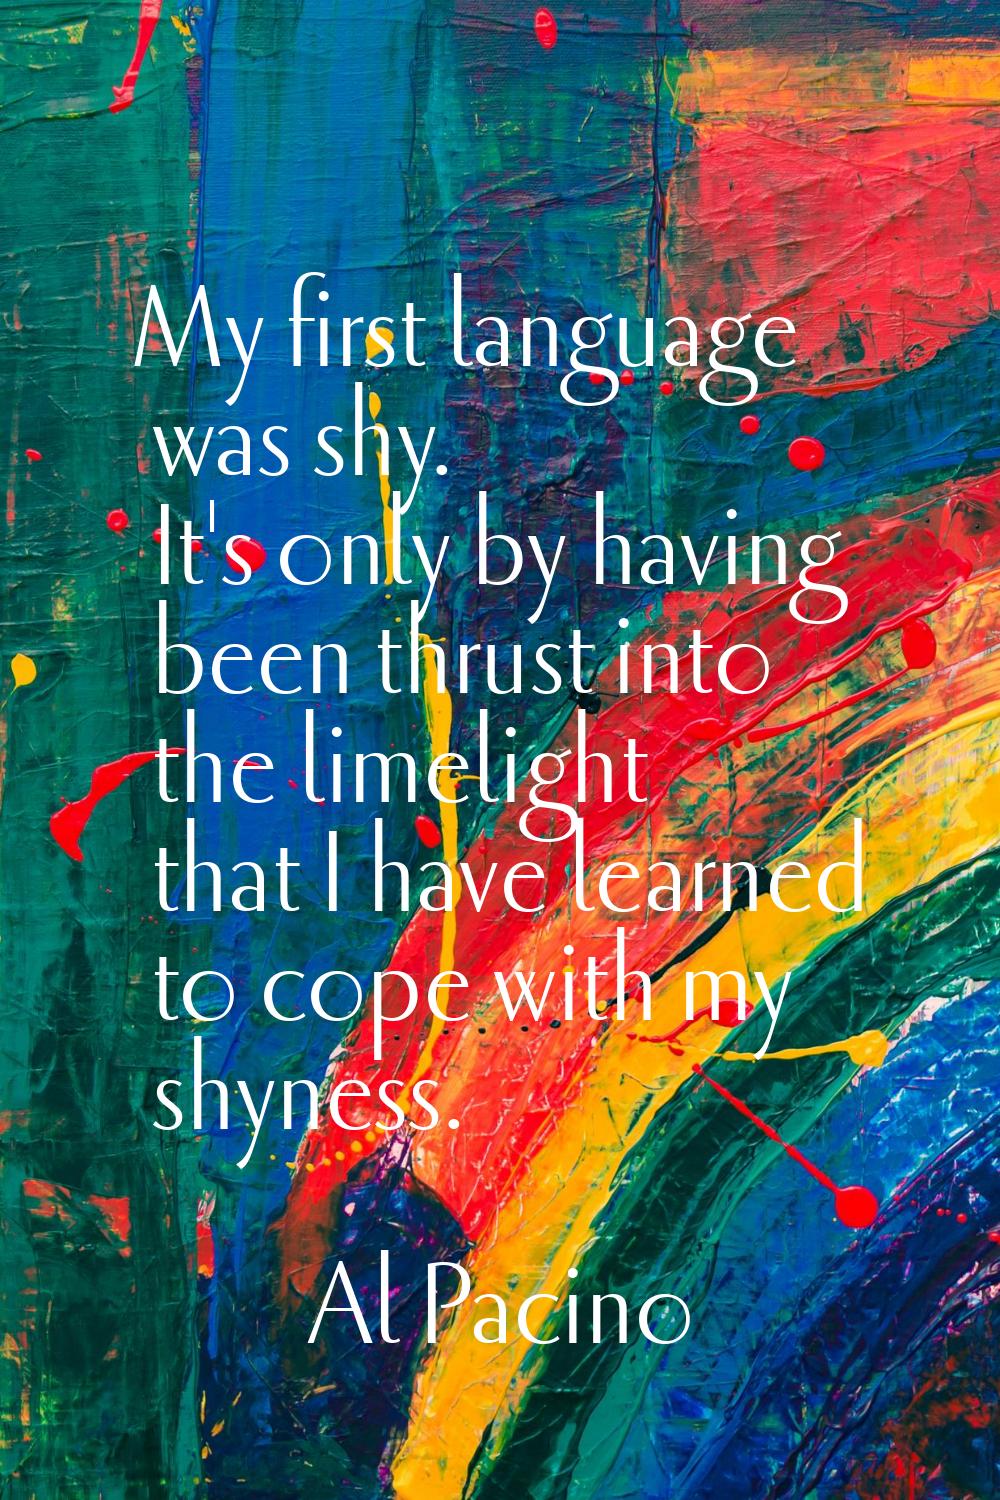 My first language was shy. It's only by having been thrust into the limelight that I have learned t